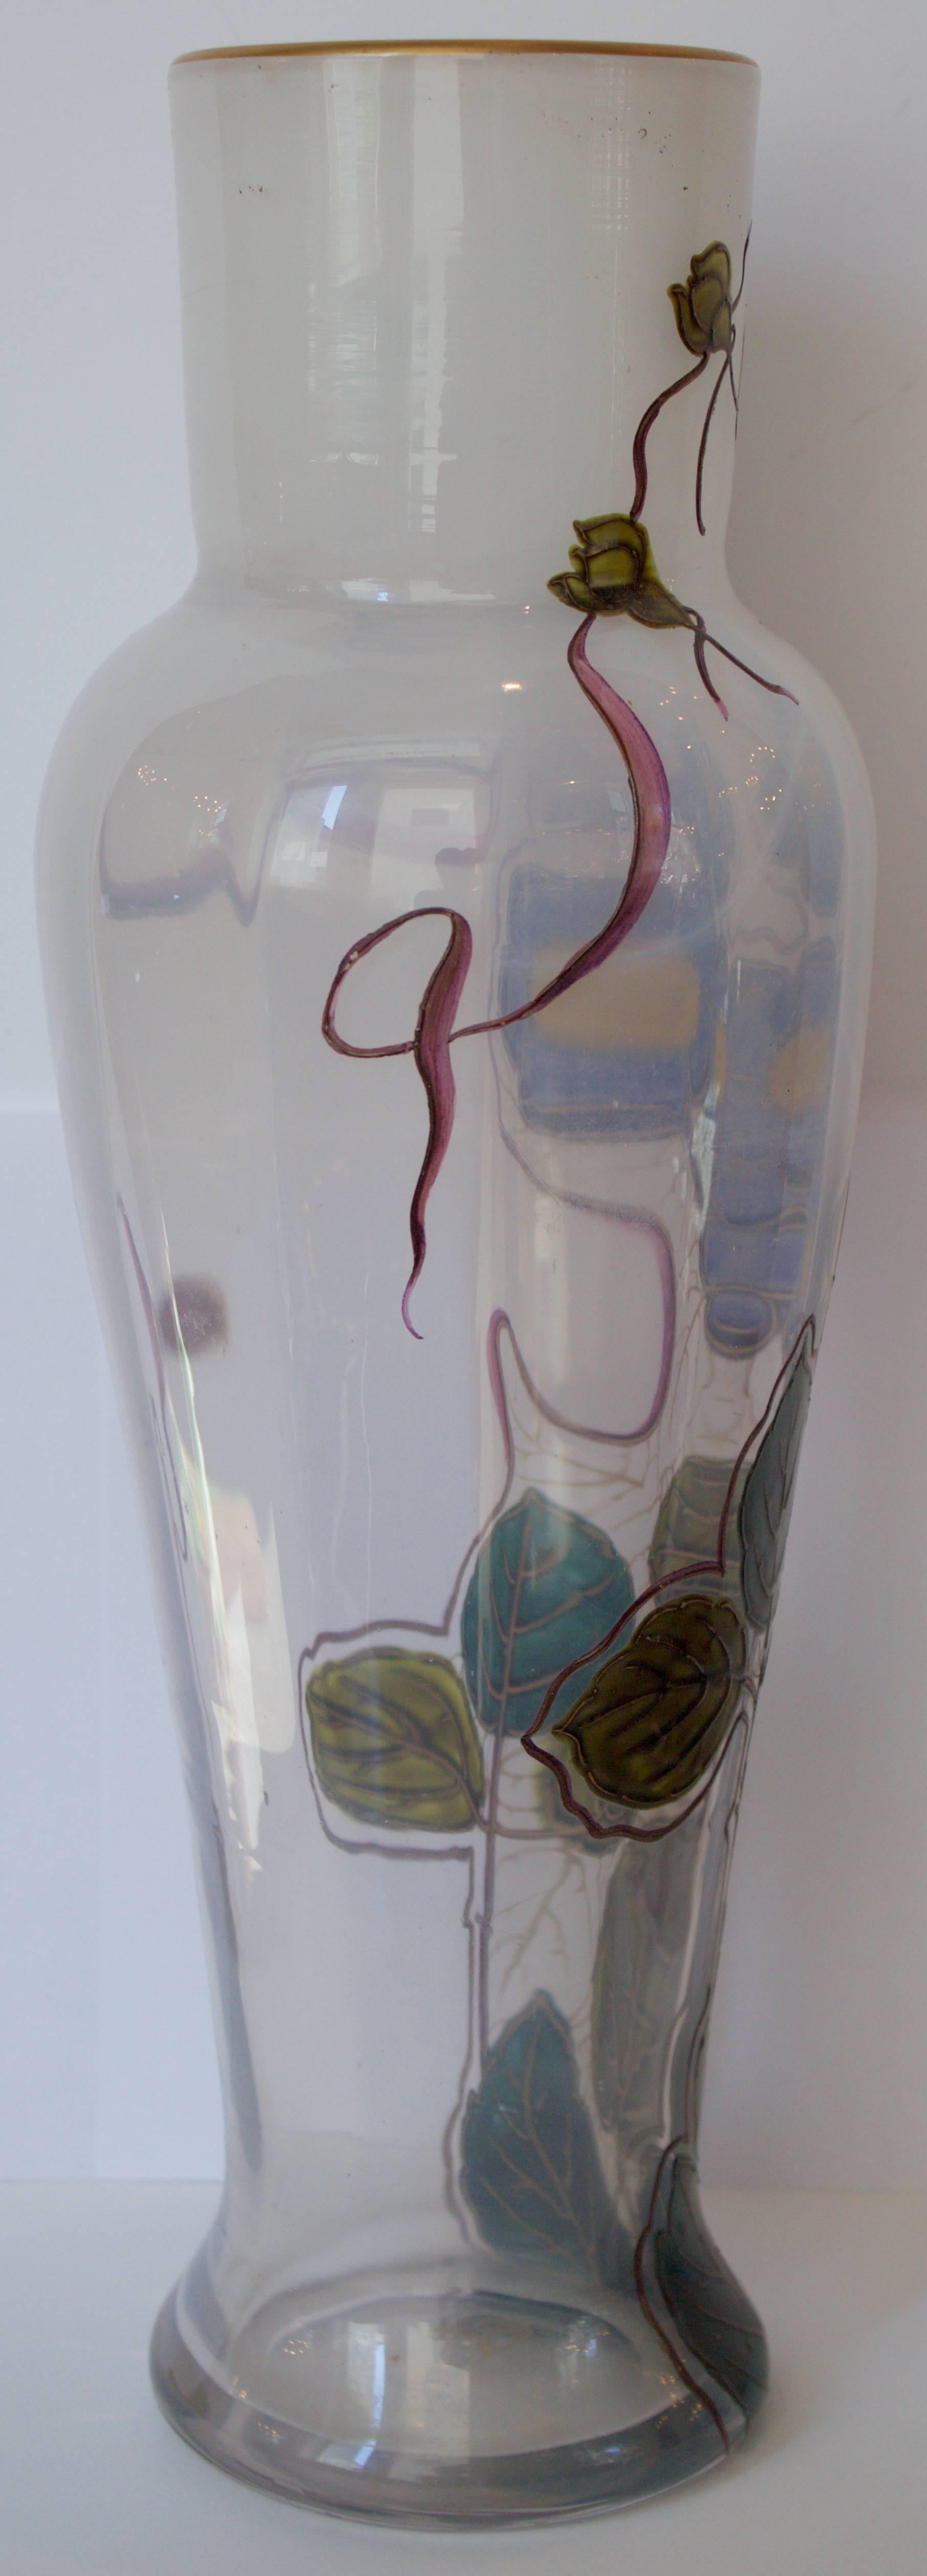 Art Nouveau French 19th Century Glass Vase by Legras Signed 